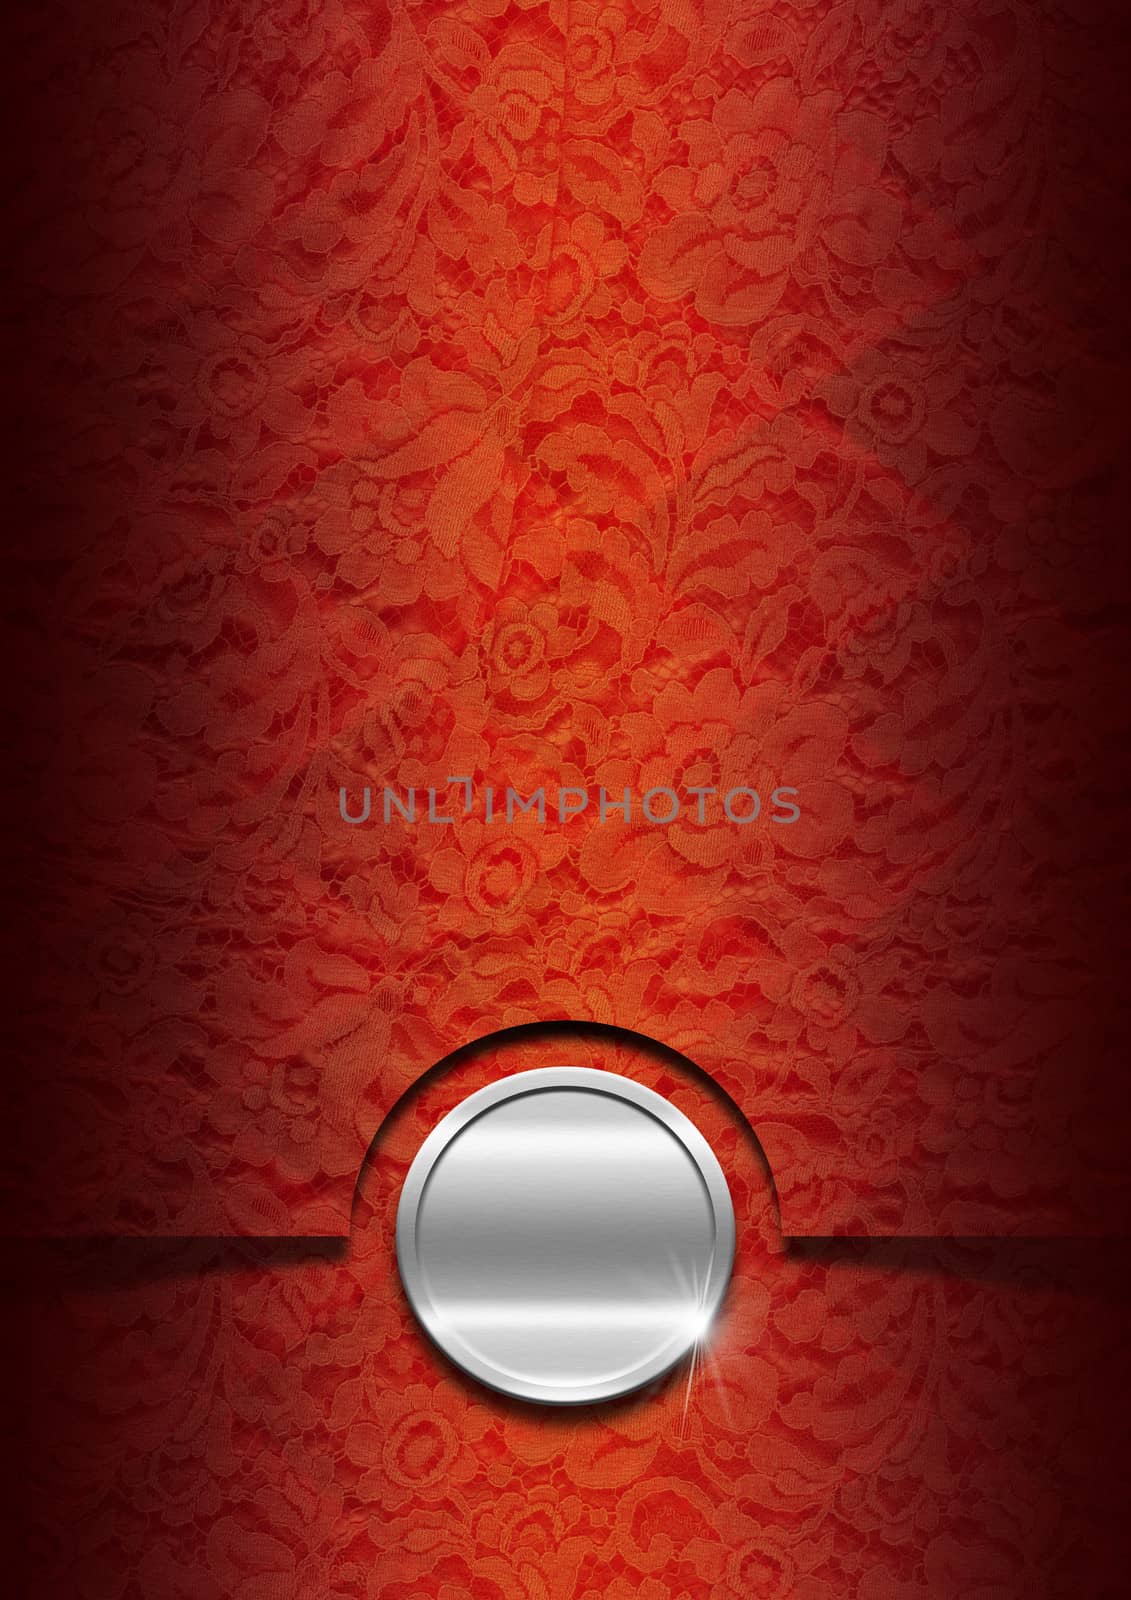 Red and orange texture with ornate floral seamless with with metal plate